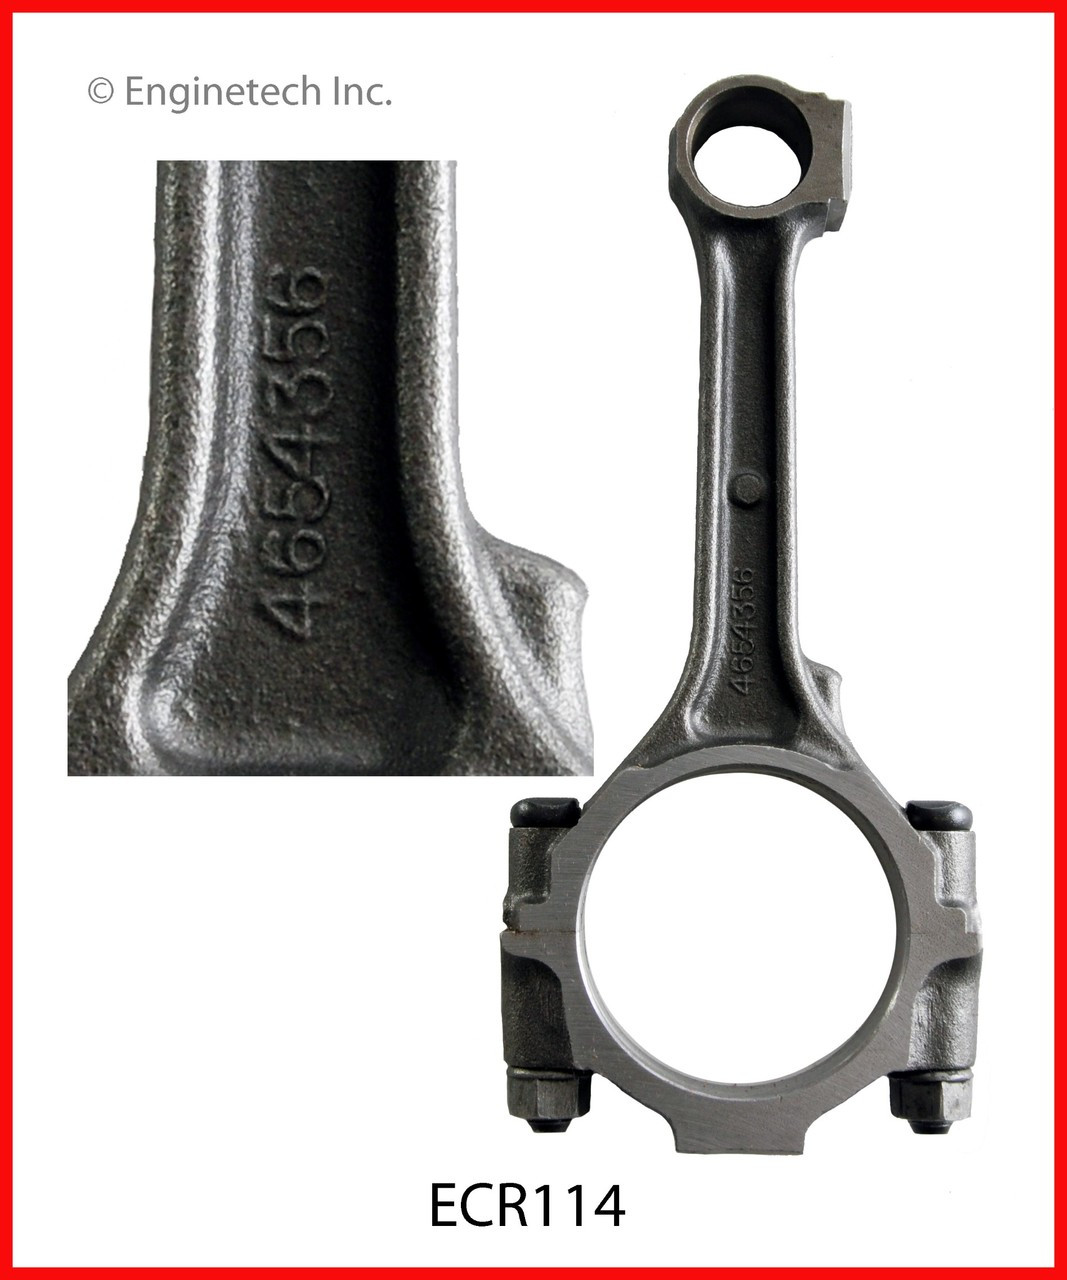 Connecting Rod - 2010 Chrysler Town & Country 3.8L (ECR114.E50)